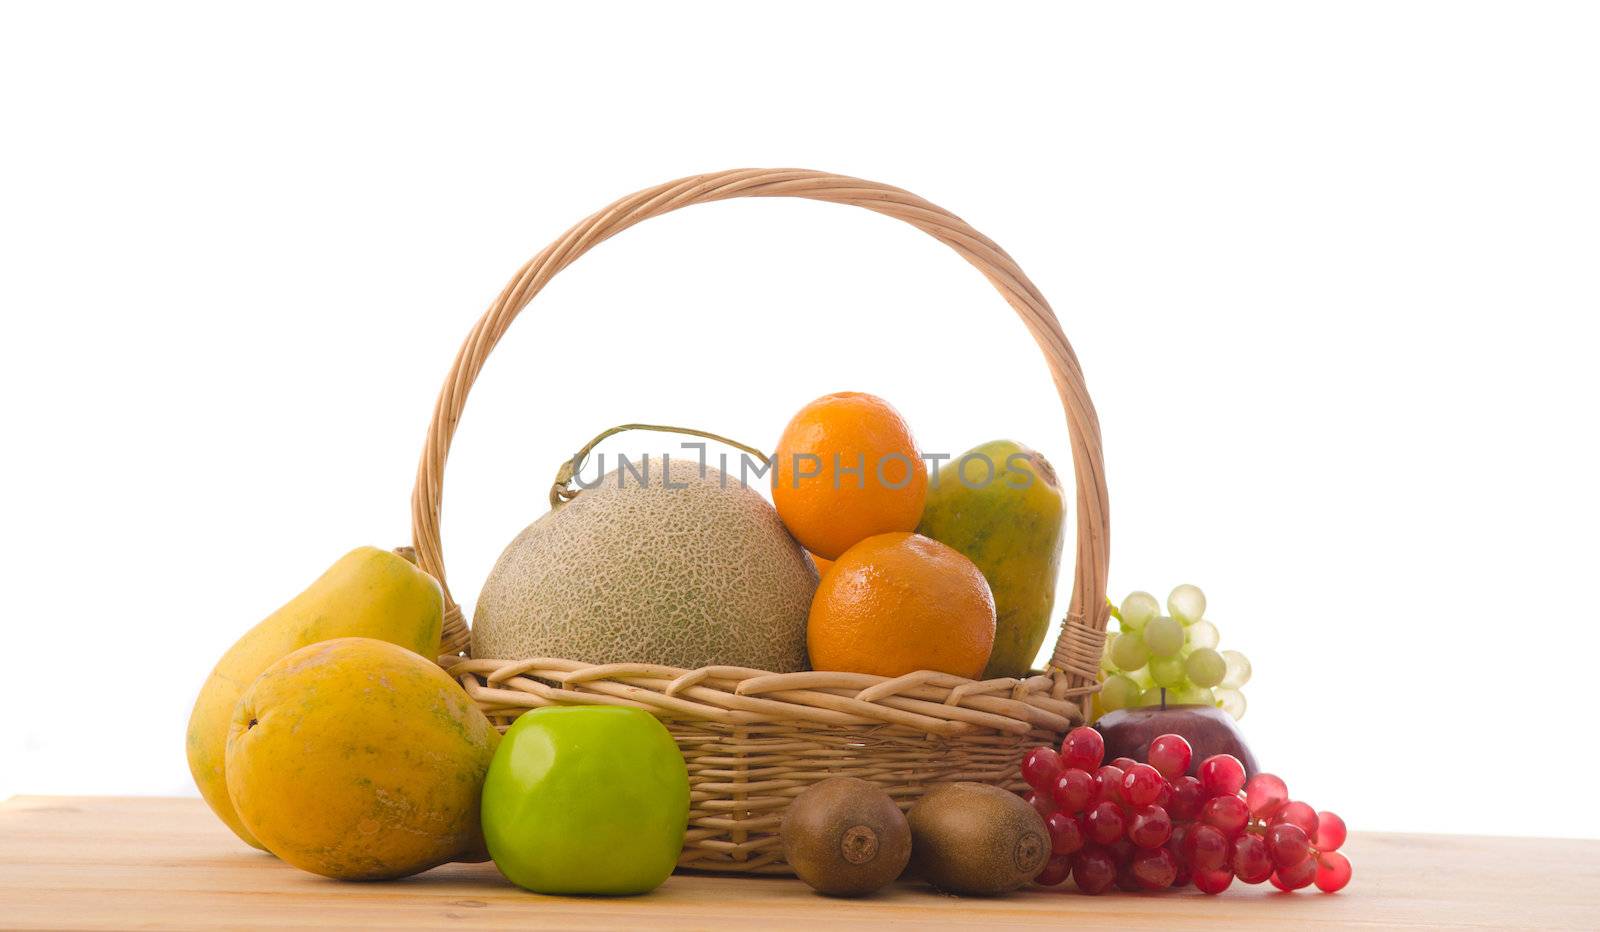 group on fruits on basket by yuliang11